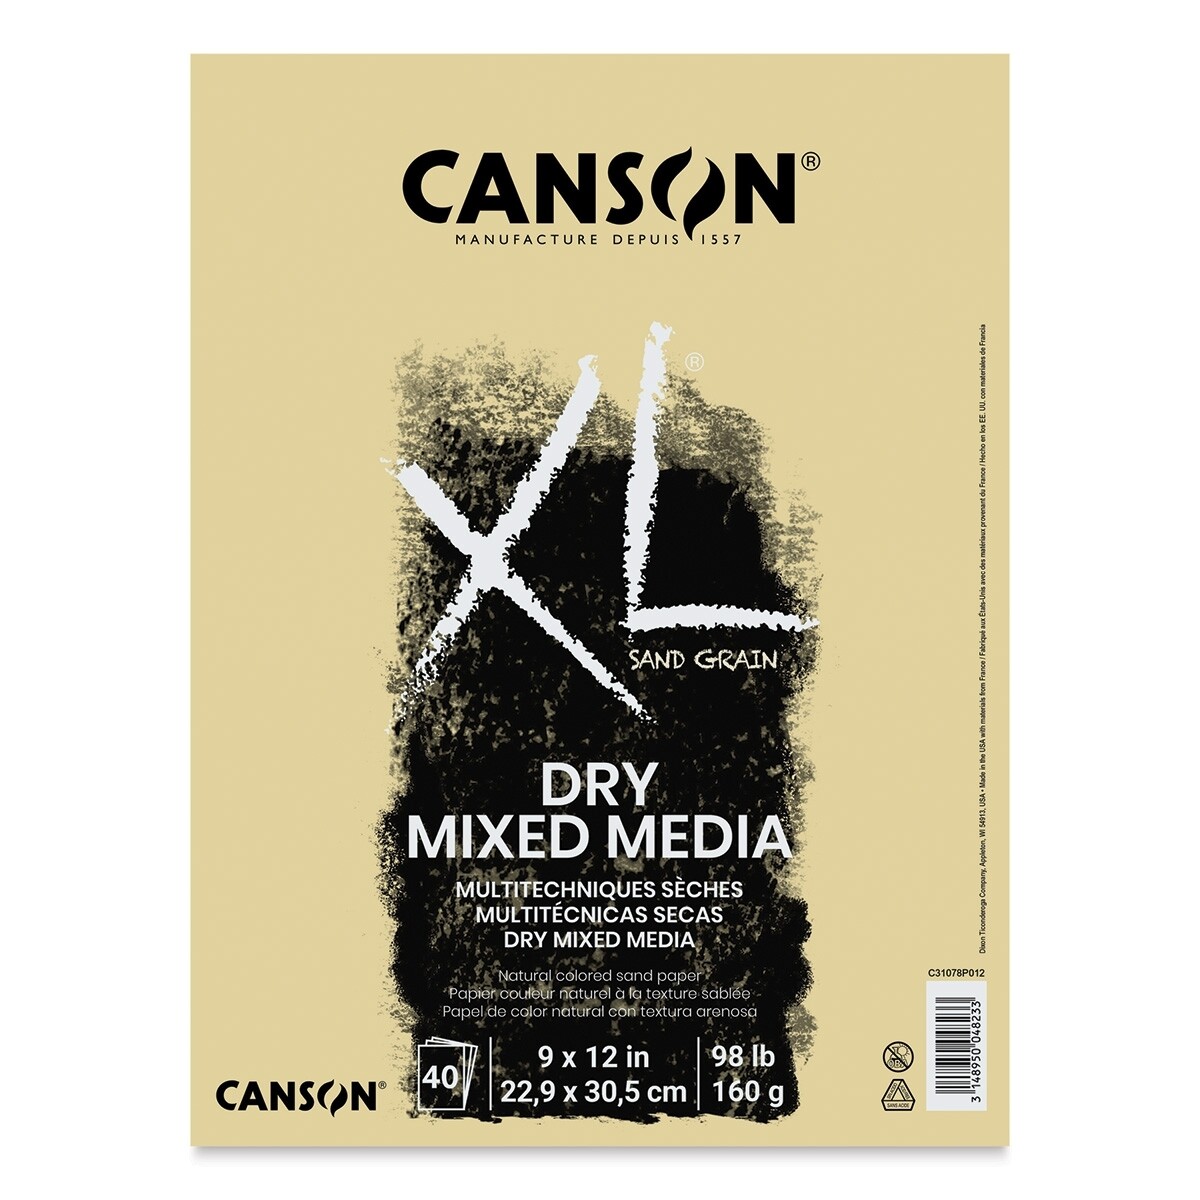 Canson XL Dry Mixed Media Pad - Sand Grain Paper